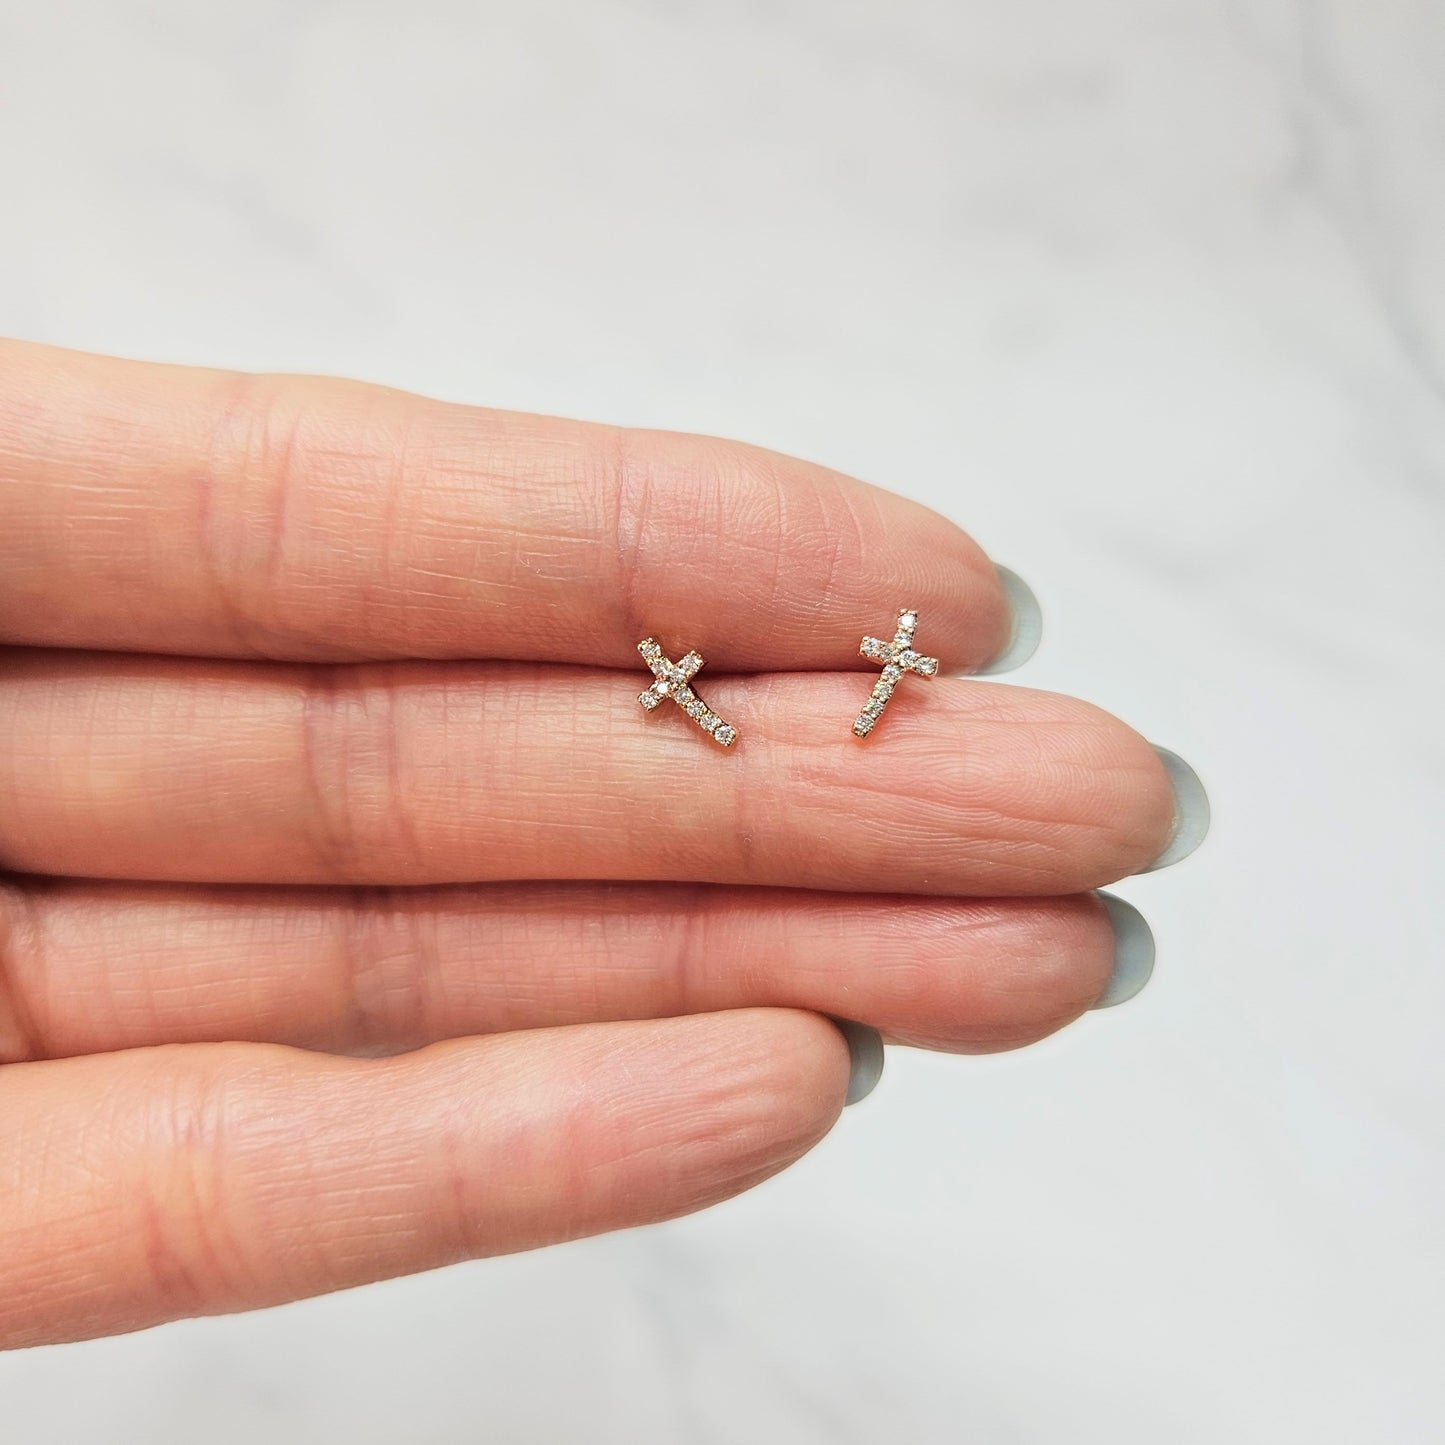 Diamond Cross Earrings/14k Diamond Cross Earring/ Dainty Earrings/ Tiny Cross Earring/ Diamond Cross Stud/ For Pai / Gifts for her